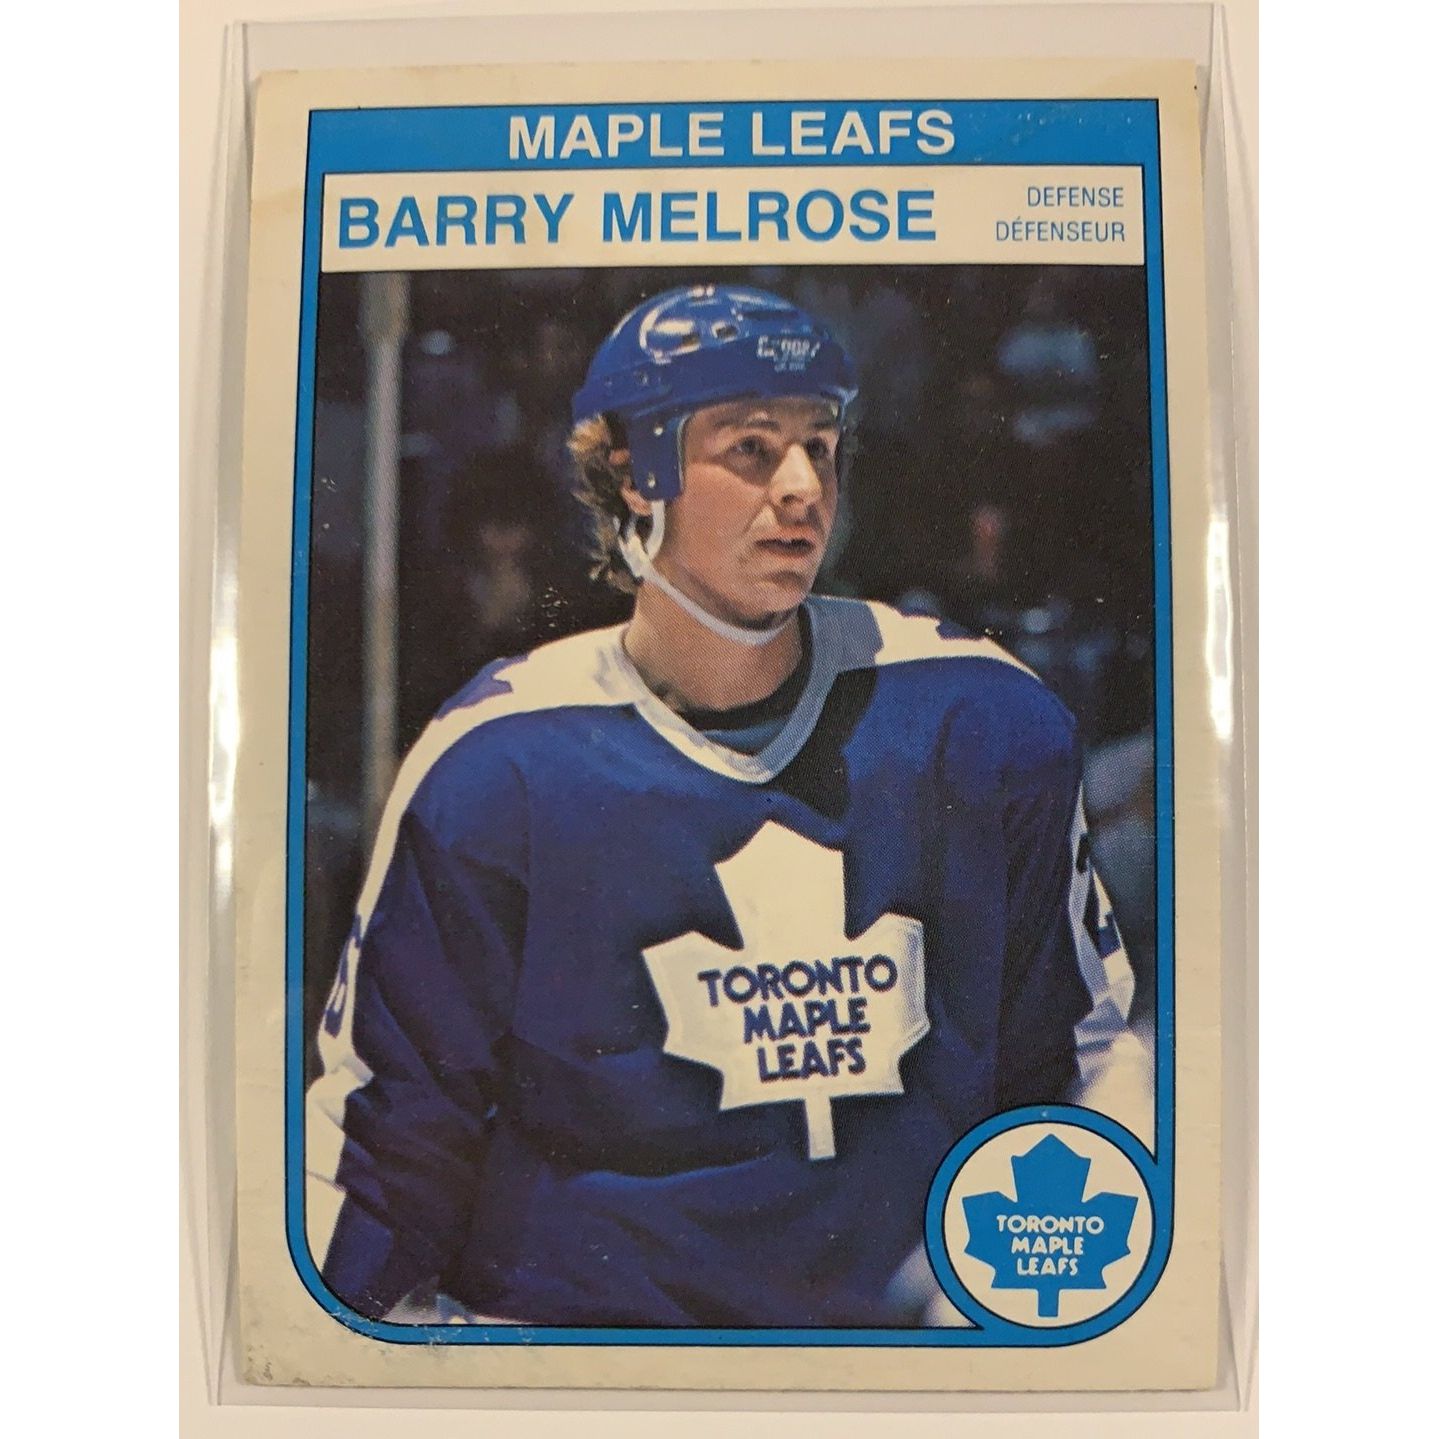  1982-83 O-Pee-Chee Barry Melrose Base #328  Local Legends Cards & Collectibles